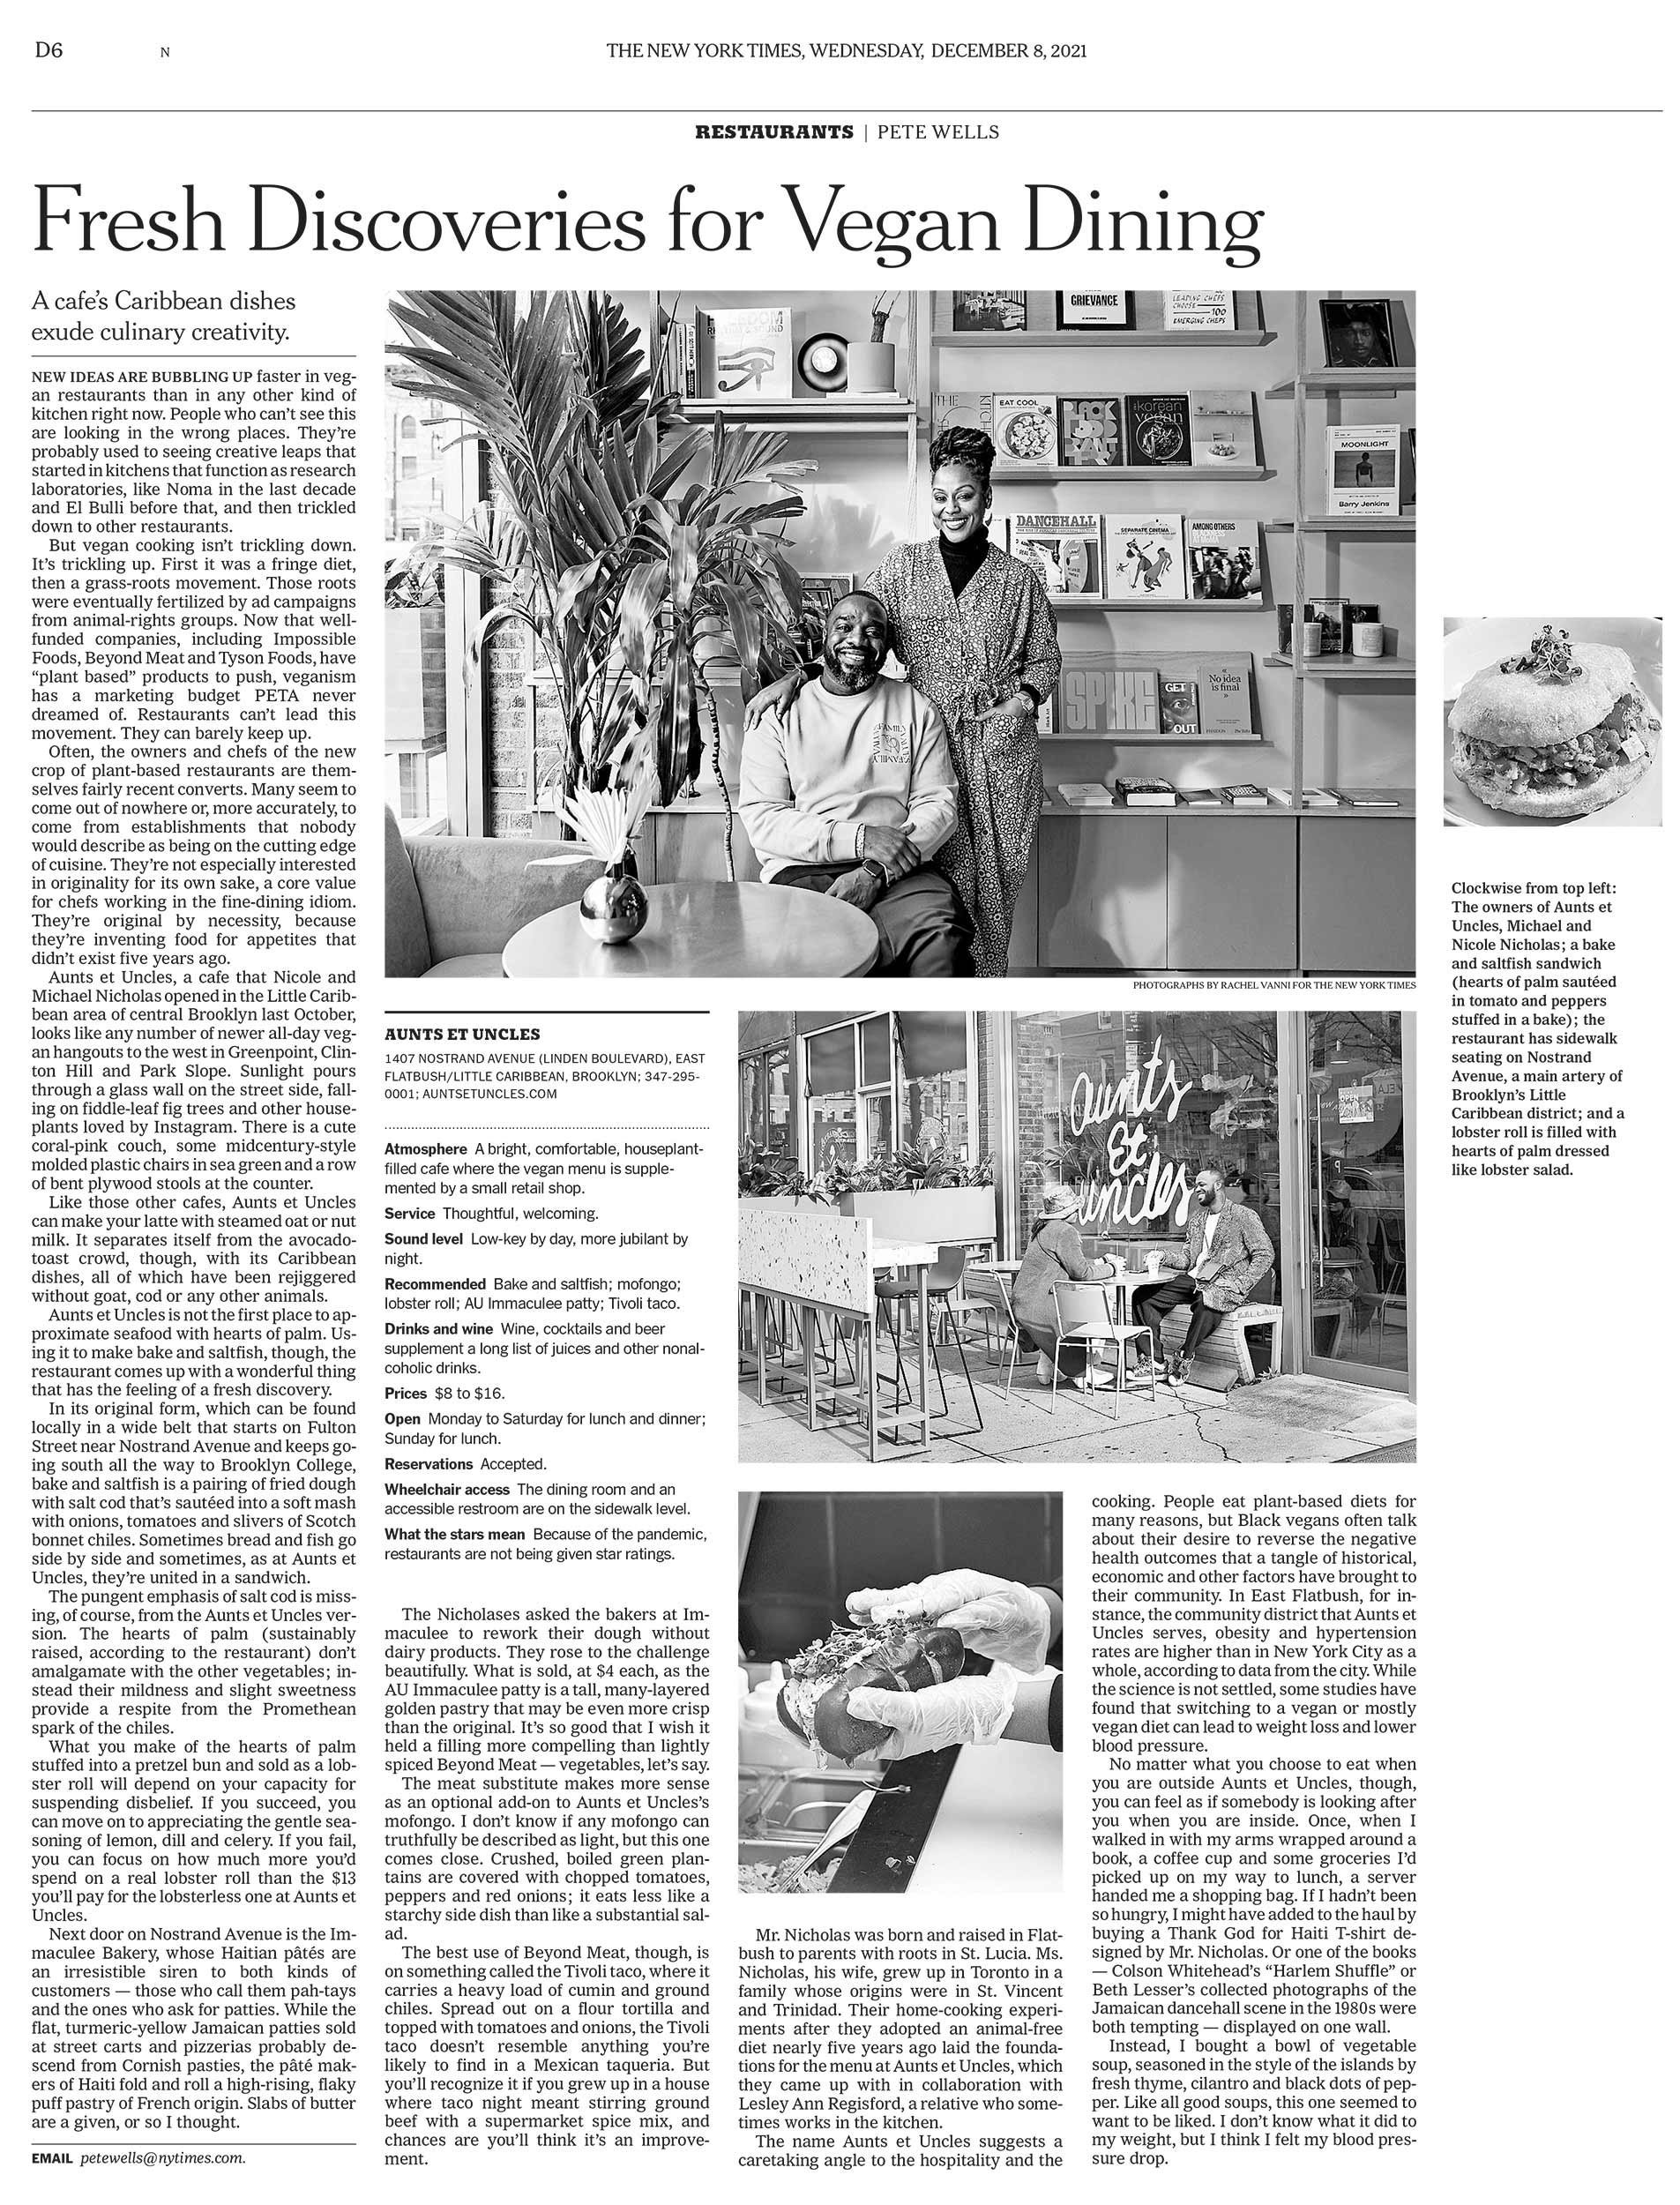 nyc-nj-food-editorial-photographer-nytimes-aunts et uncles-tearsheet.jpg